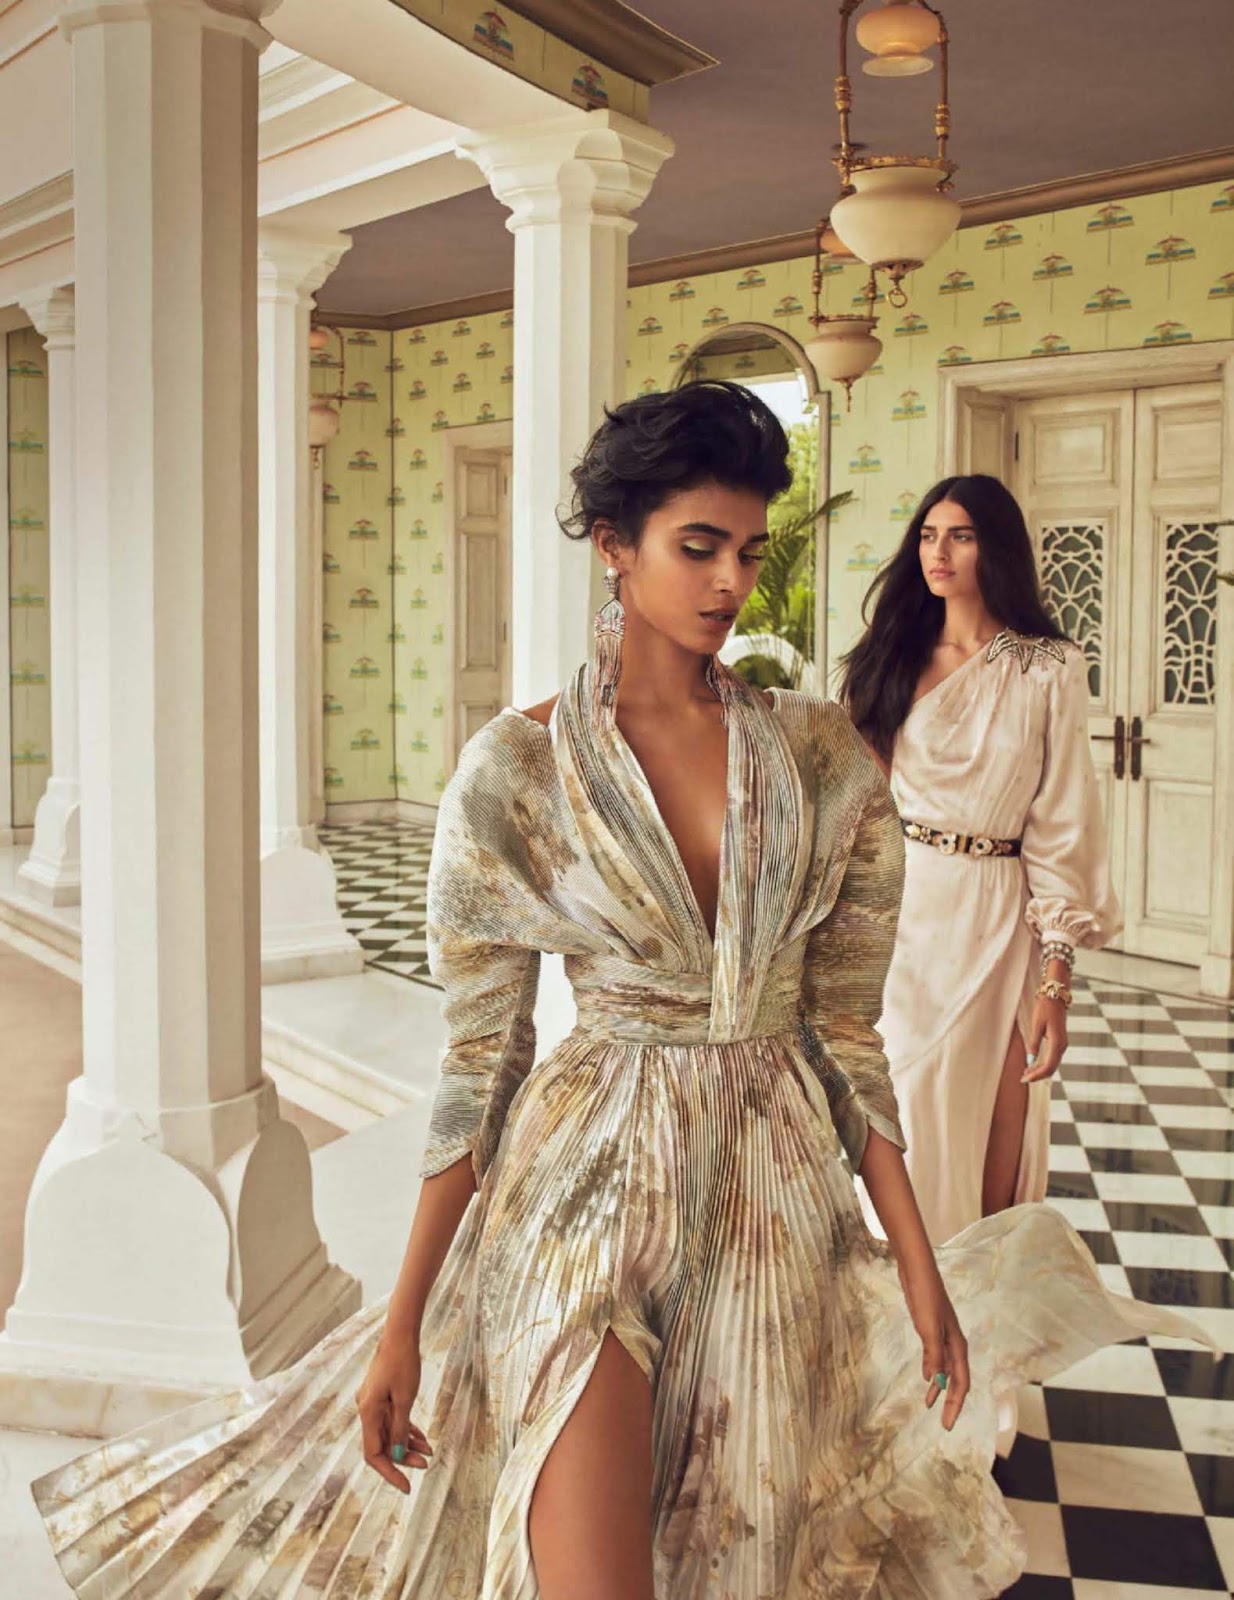 Vadher & Nair by Greg Swales for Vogue India Sept 2018 (17).jpg